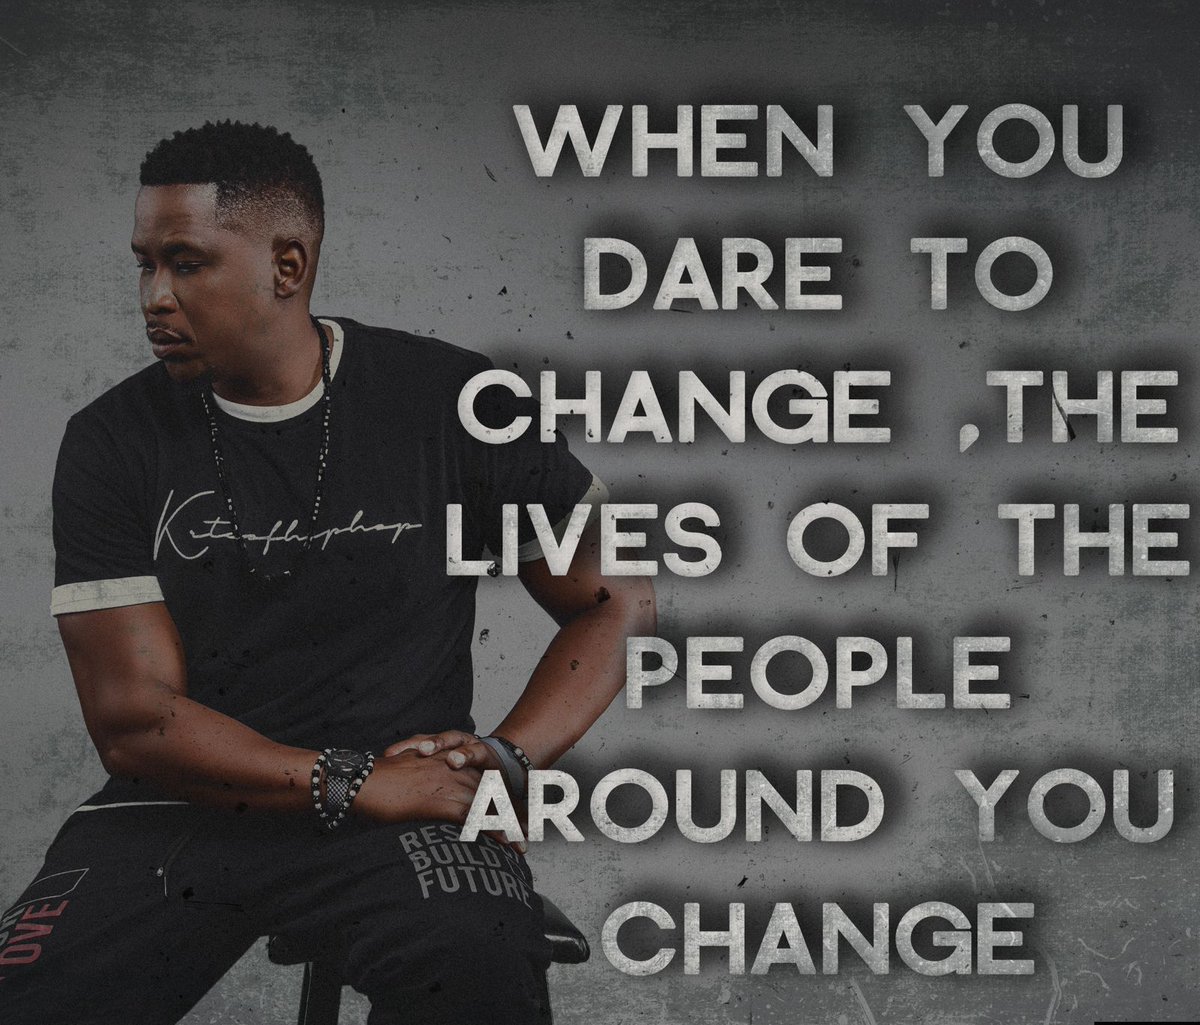 When you dare to change, you ignite a spark of possibility in the lives of those around you. Step into the unknown and witness the transformation that follows.
 
📸 @dbtafrica

#Change #unleashed #BeTheGeneration #possibility #ignite